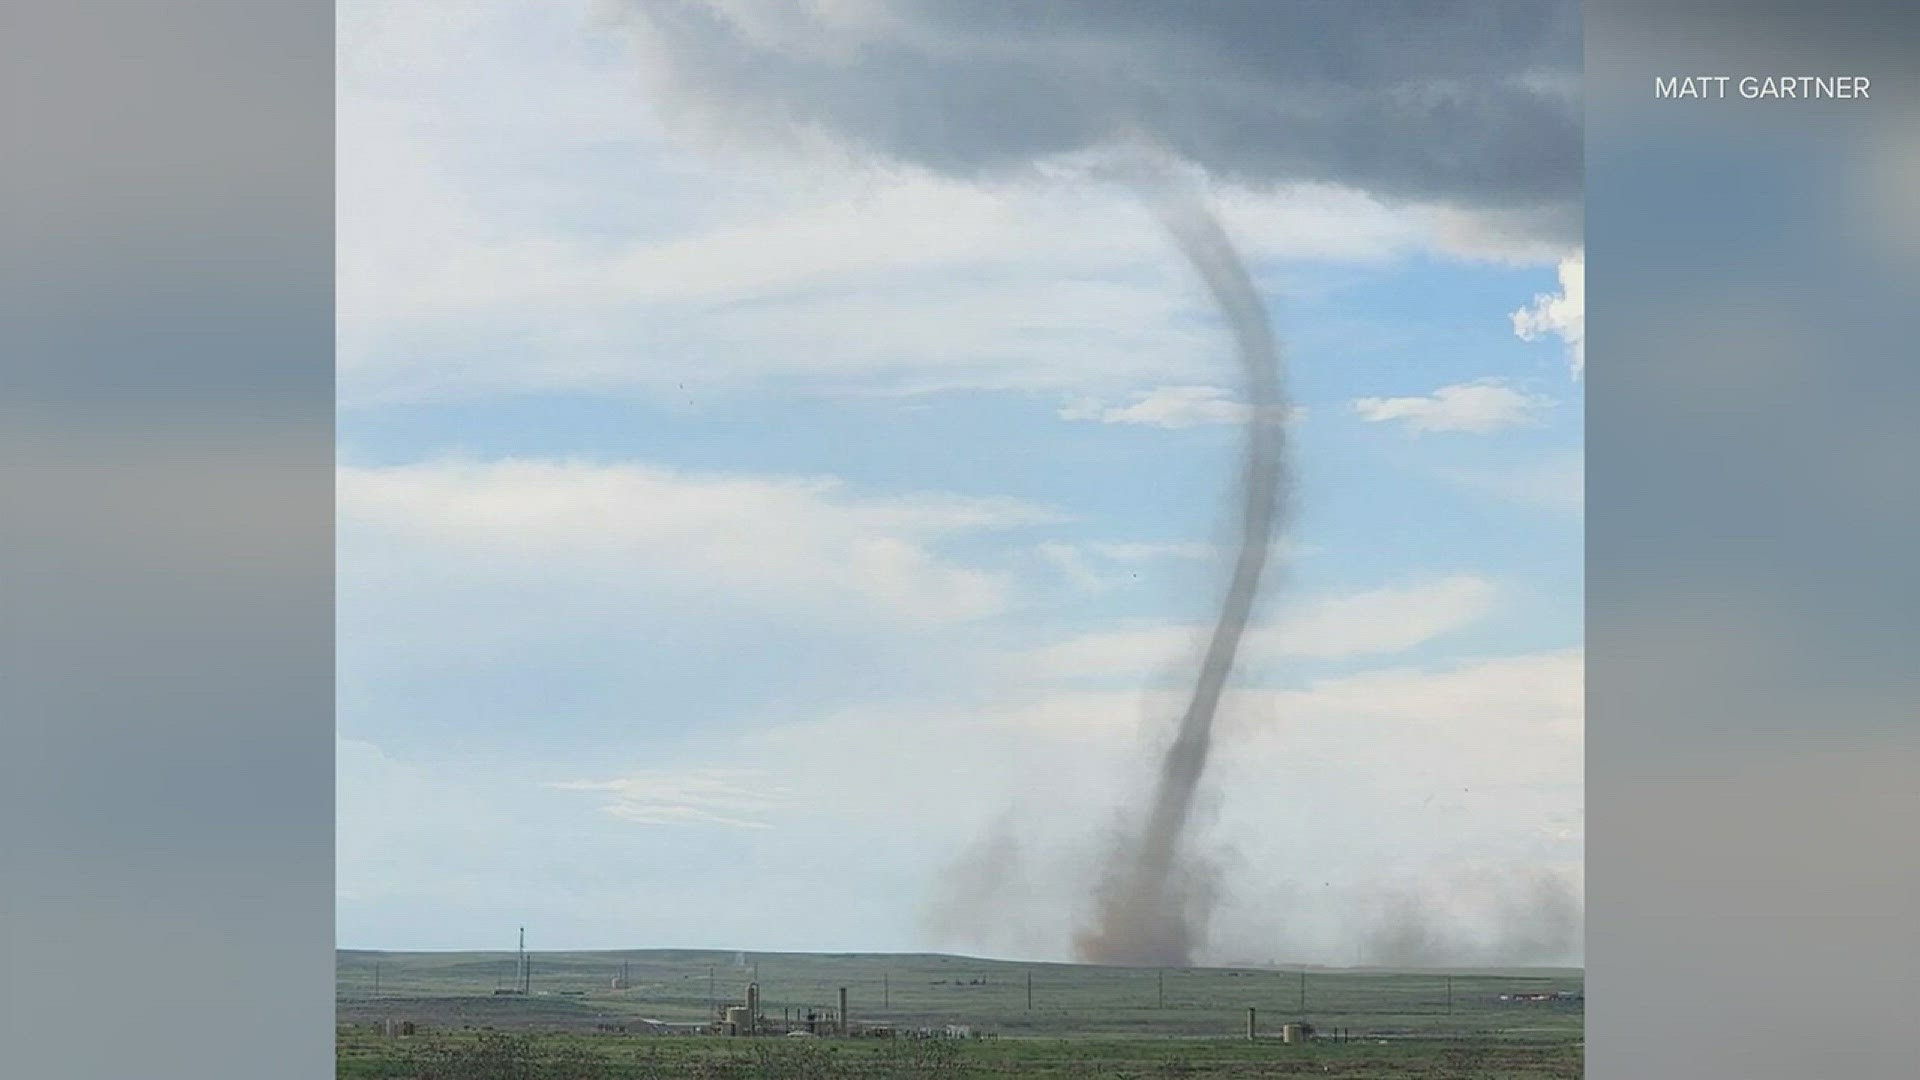 A landspout tornado was spotted east of Platteville in Weld County Tuesday afternoon as storms hit the Front Range.